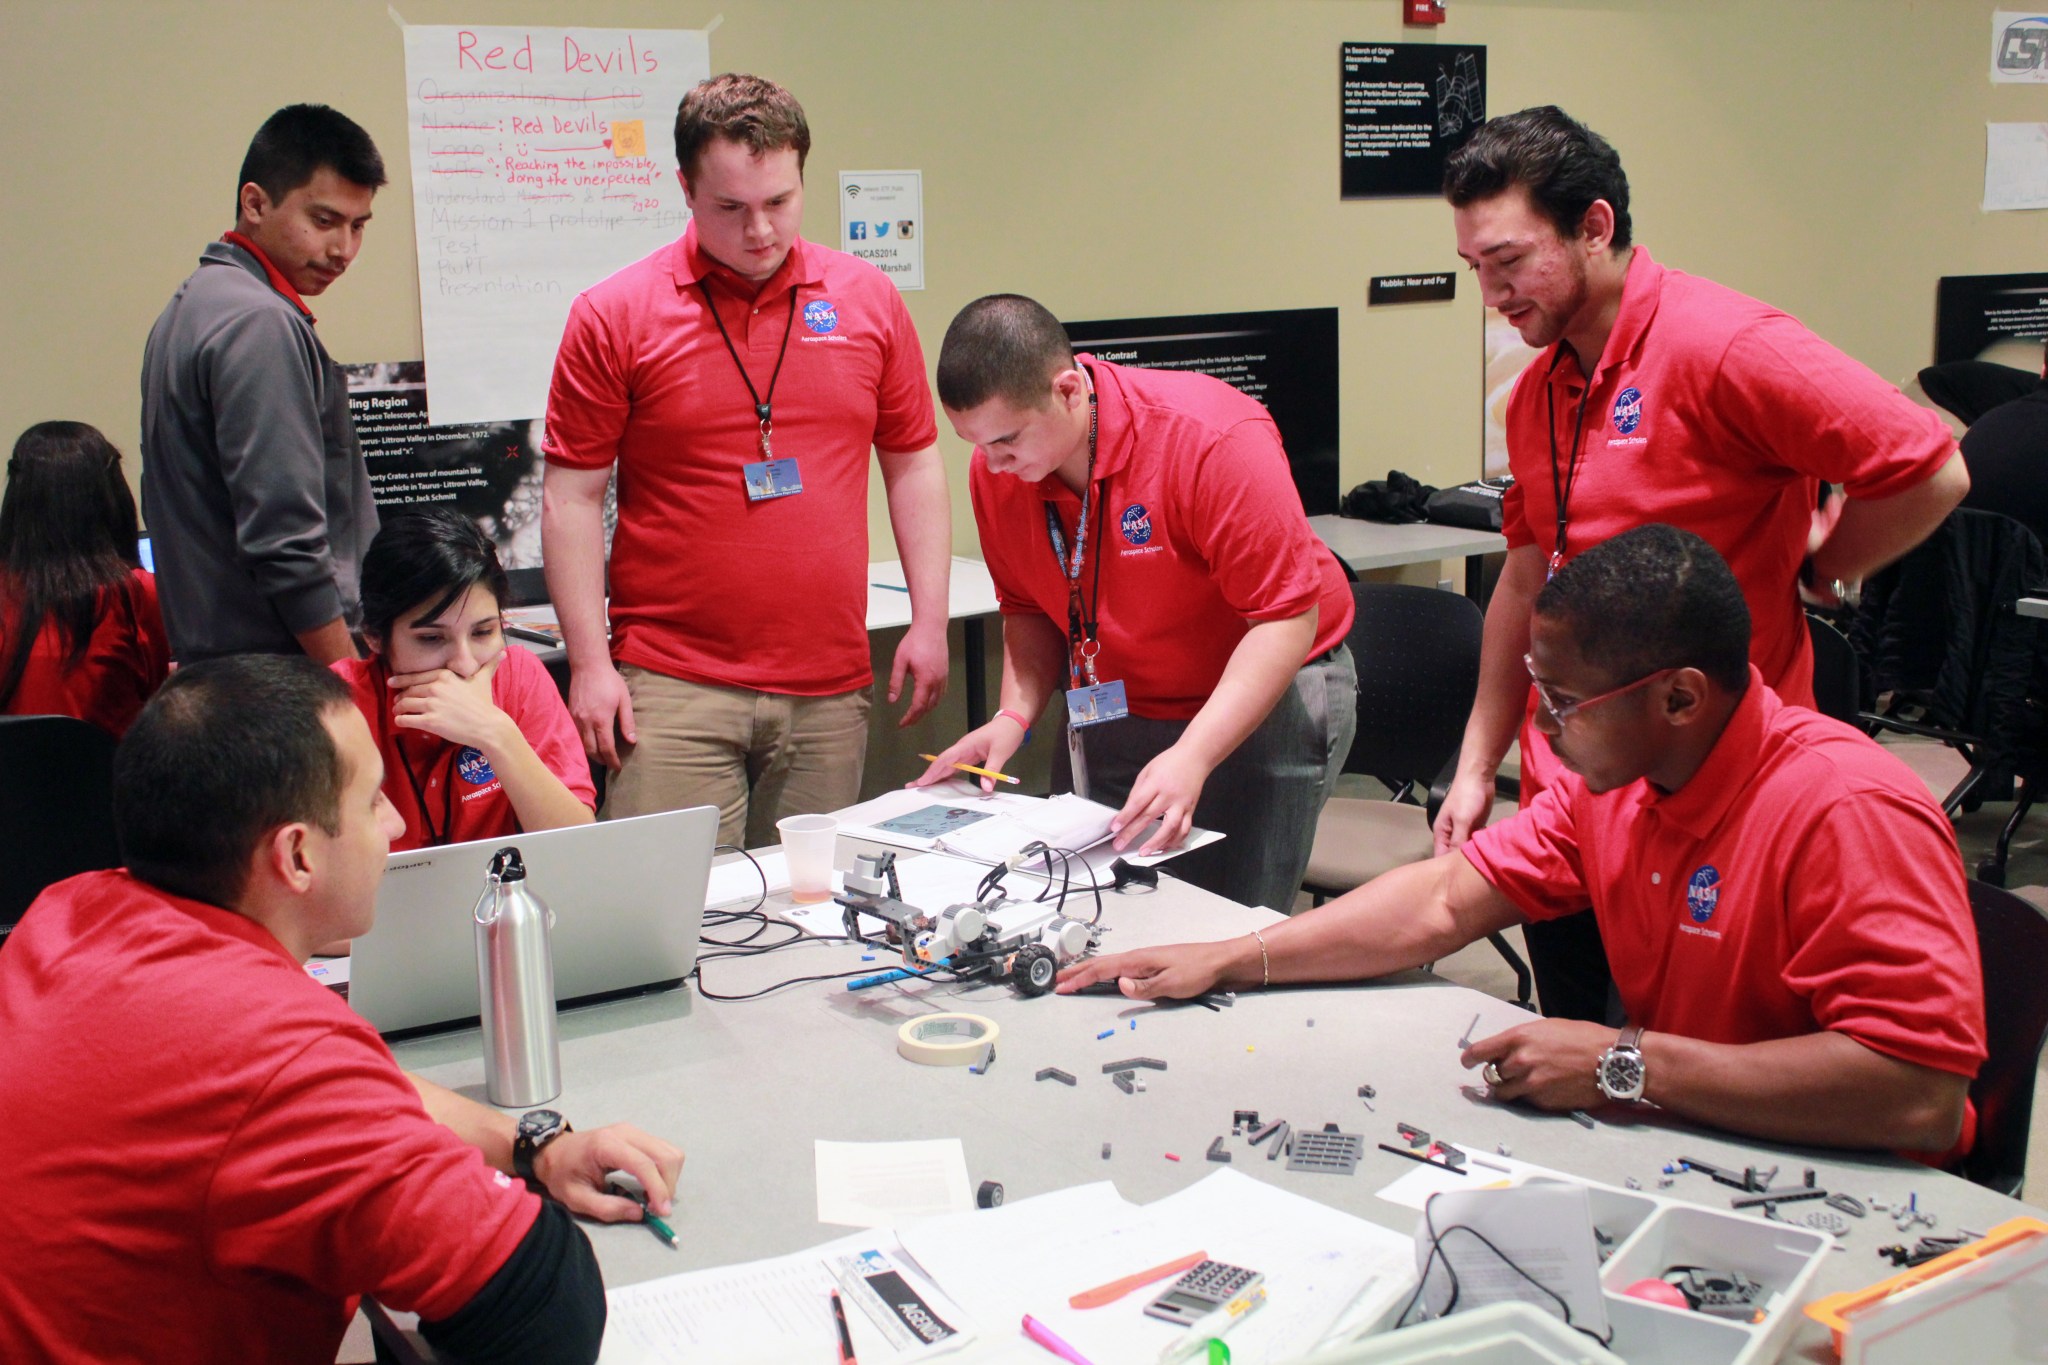 Students teams constructed a programmable robot and demonstrated its functionality on a competitive rover course.